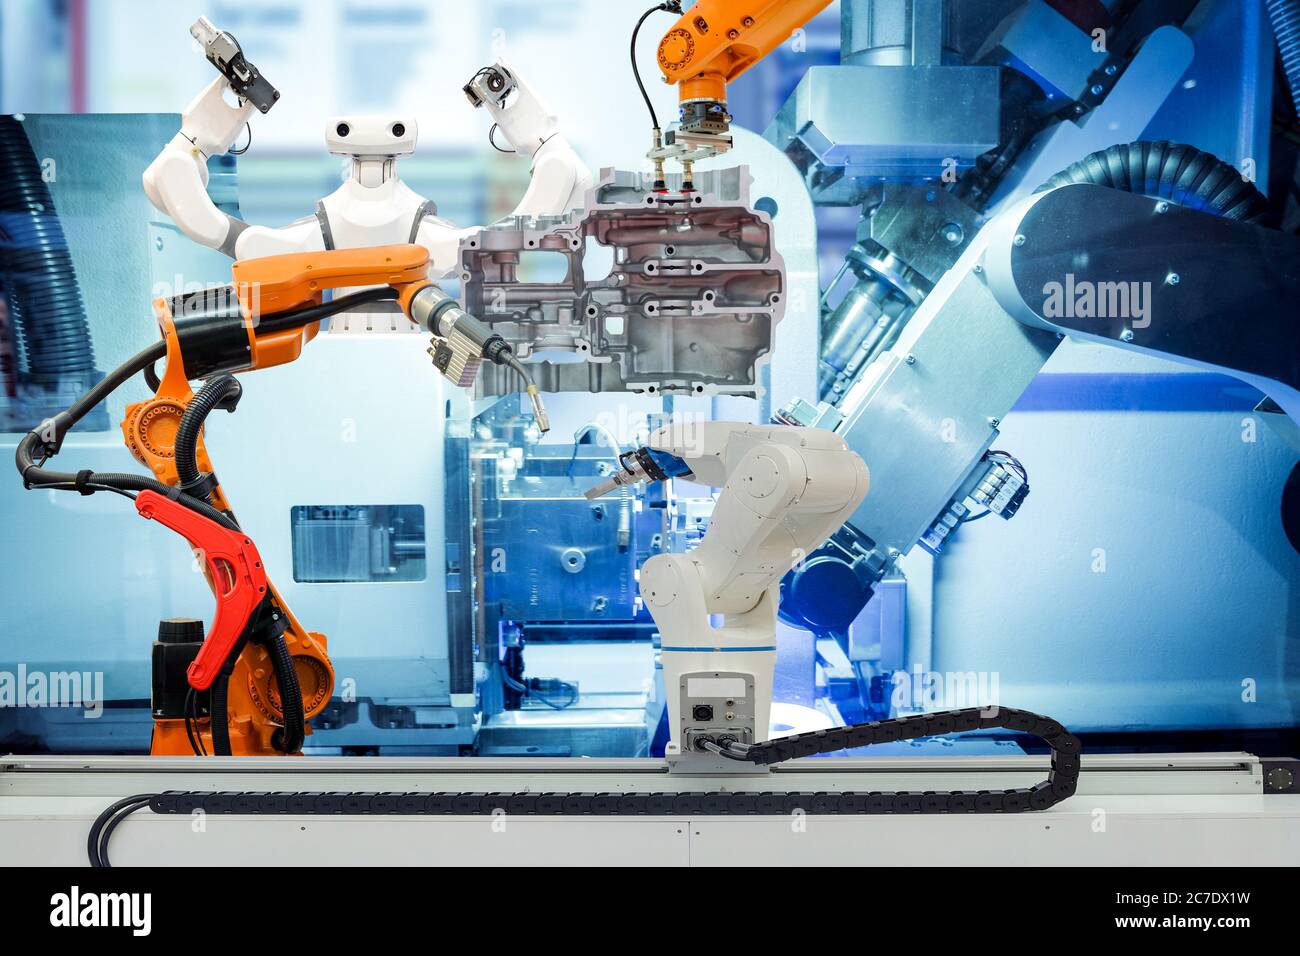 Industrial robotic working with metal part on smart factory, on machine blue tone color background, industry 4.0 and technology concept Stock Photo